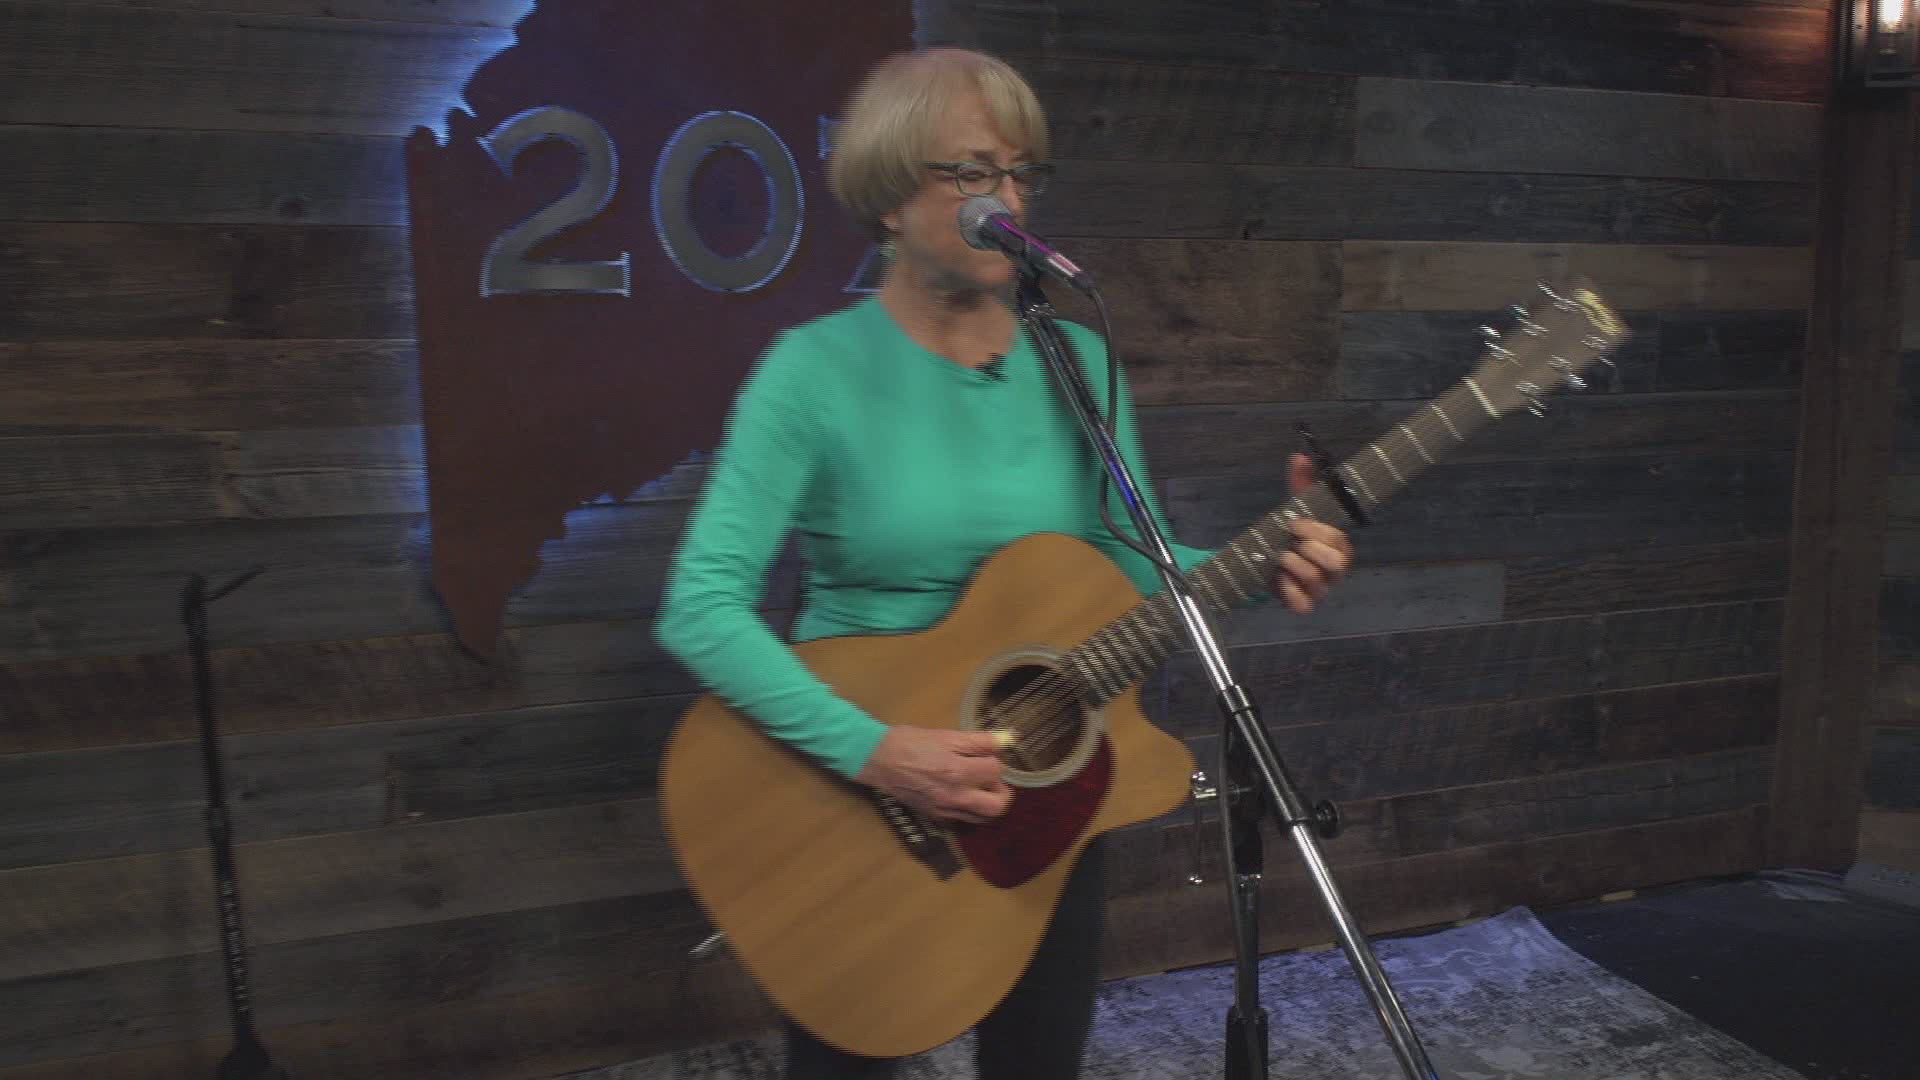 Maine folk musician Anni Clark plays one of her original songs in the 207 studio.